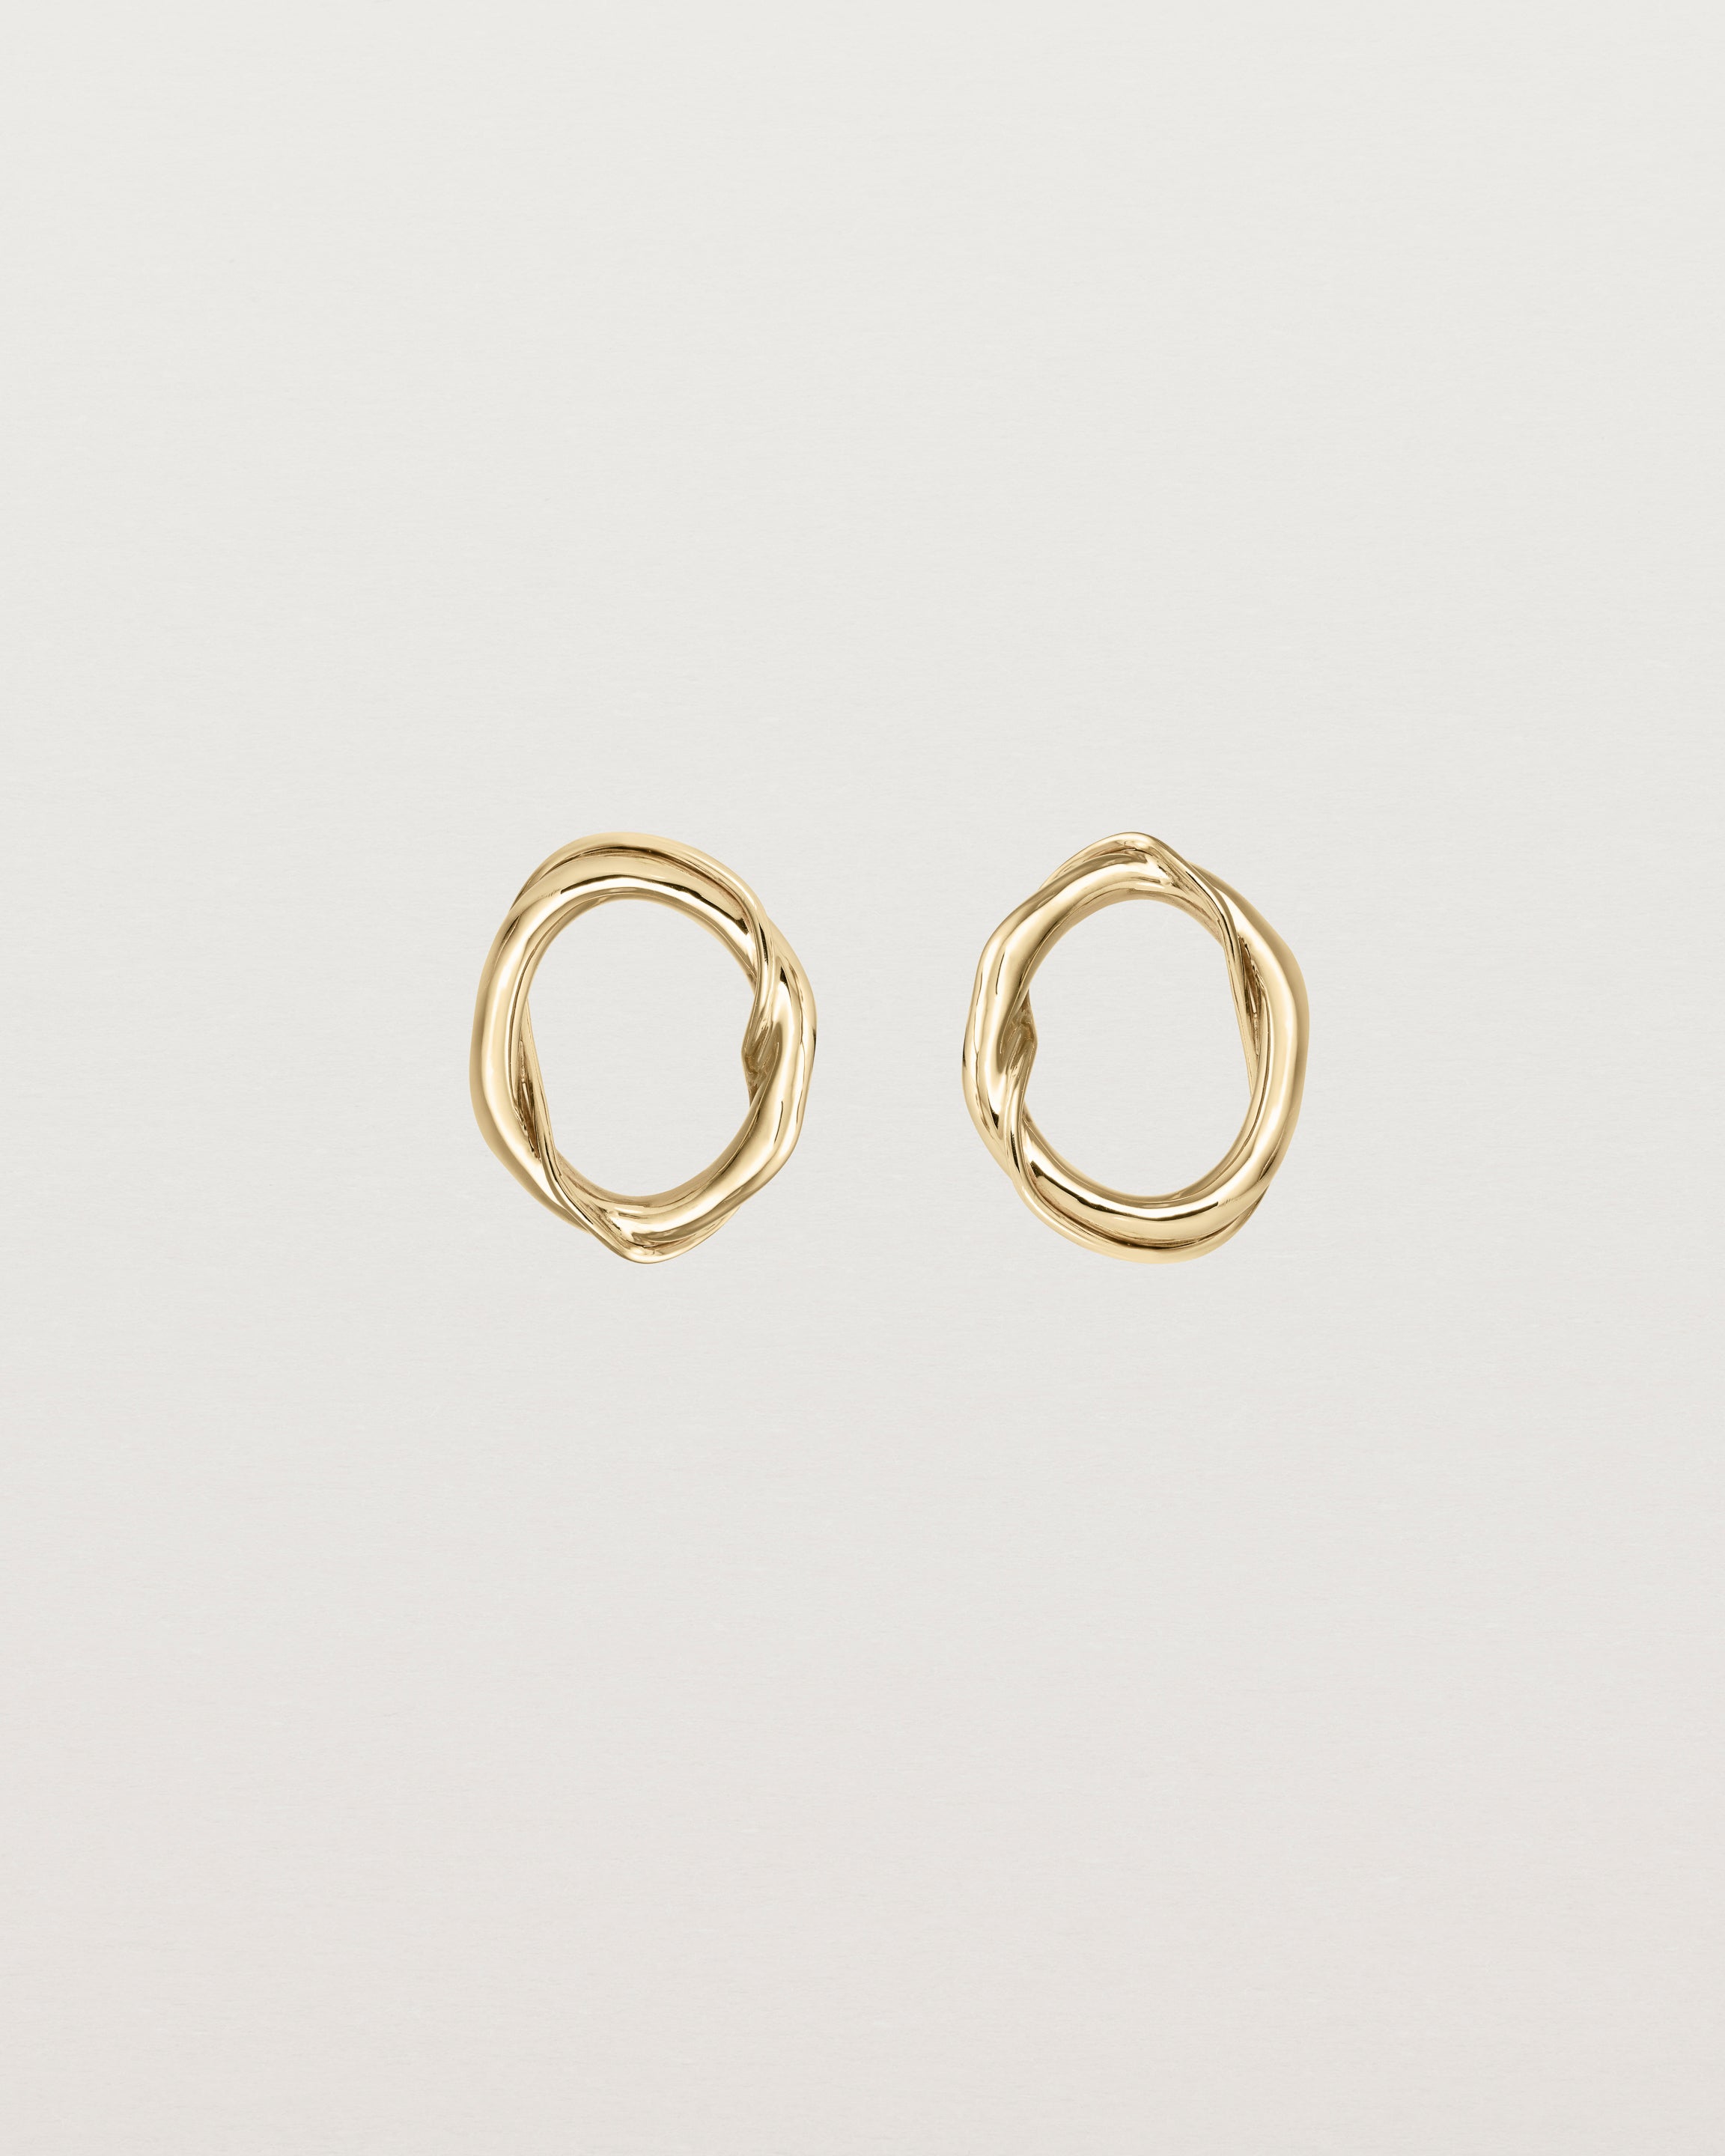 Front view of the Petite Dalí Earrings in yellow gold.